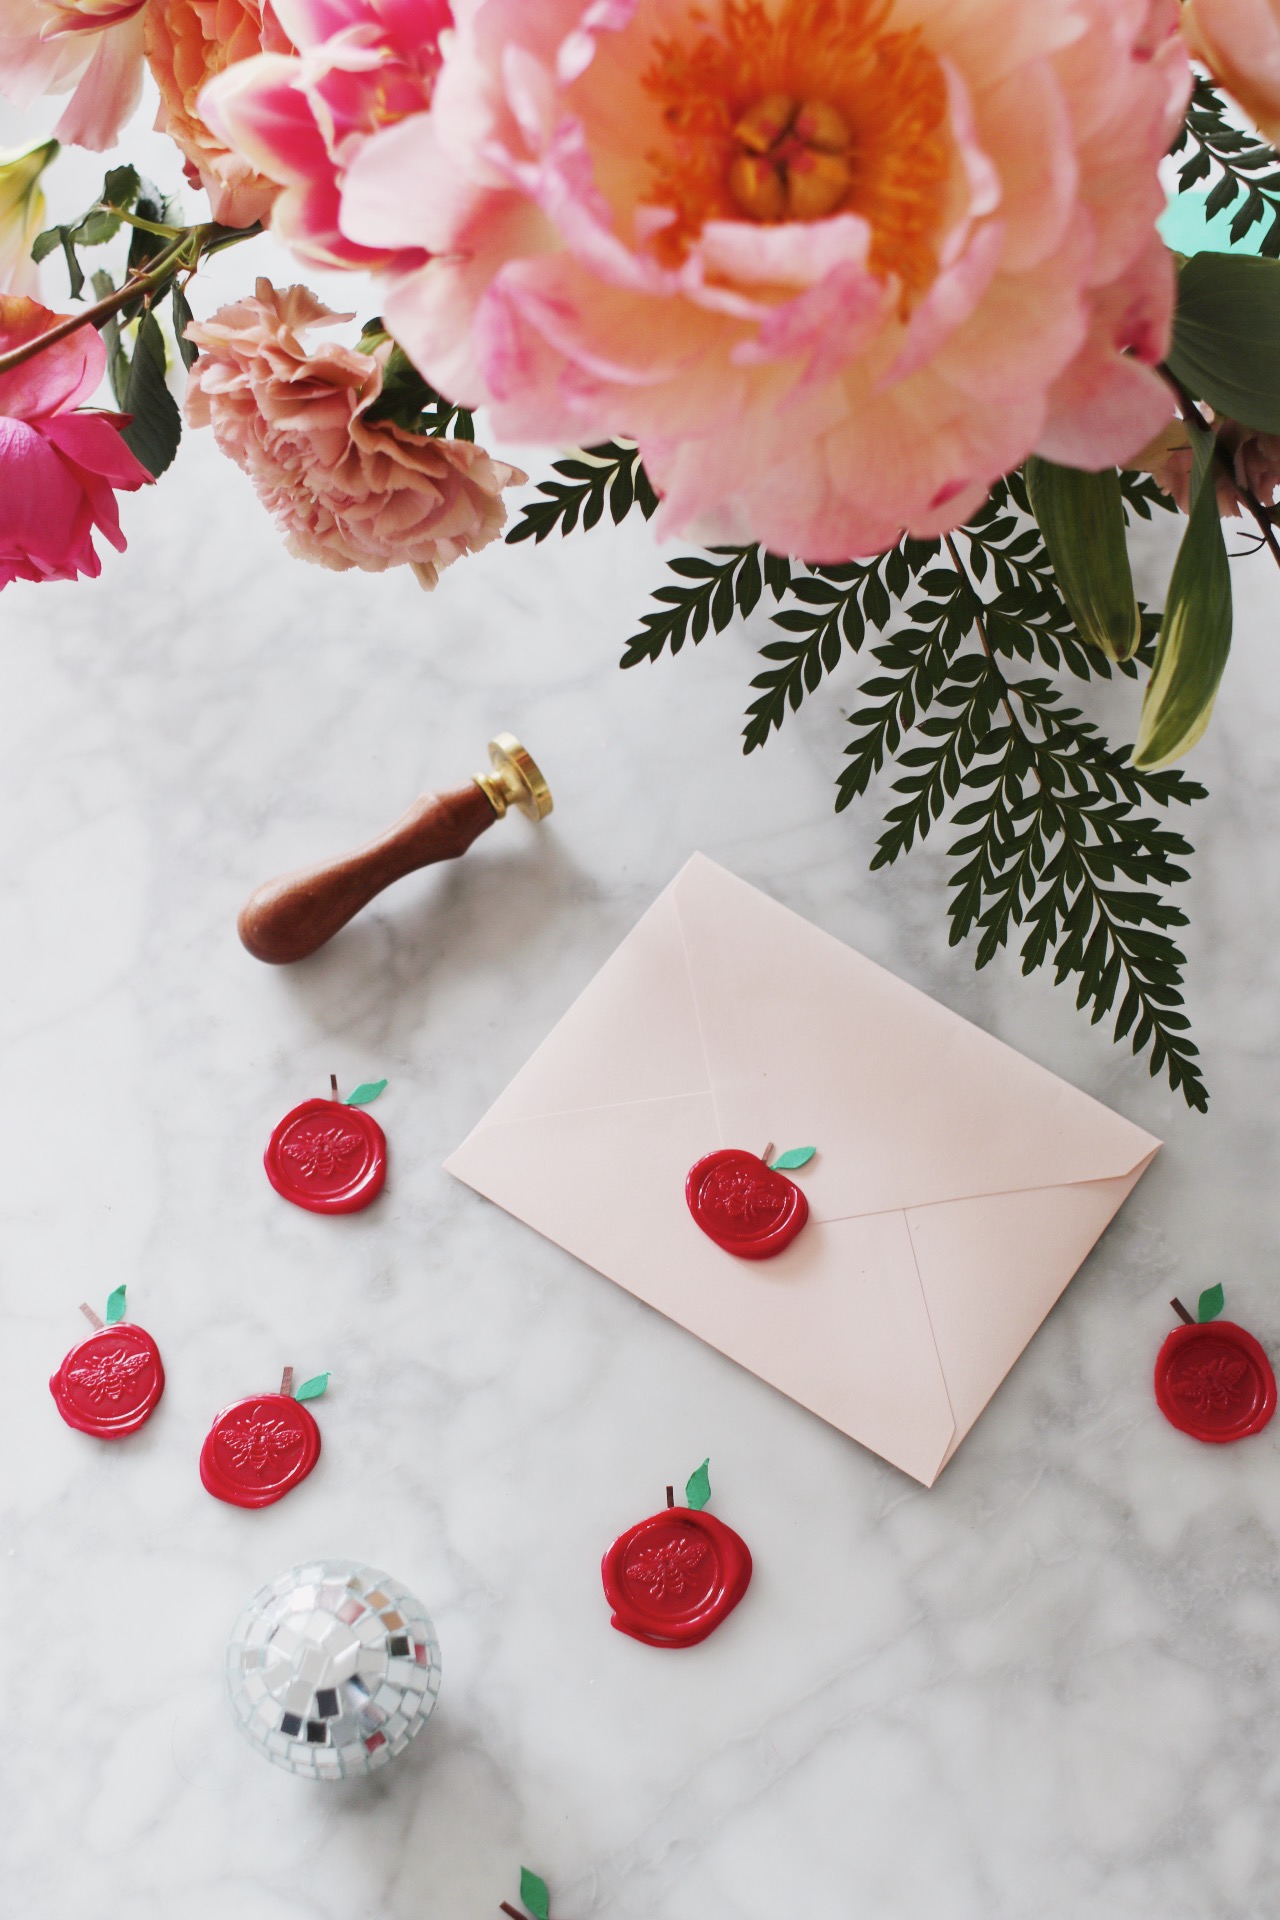 diy apple shaped wax seals tutorial and how to use a wax warmer